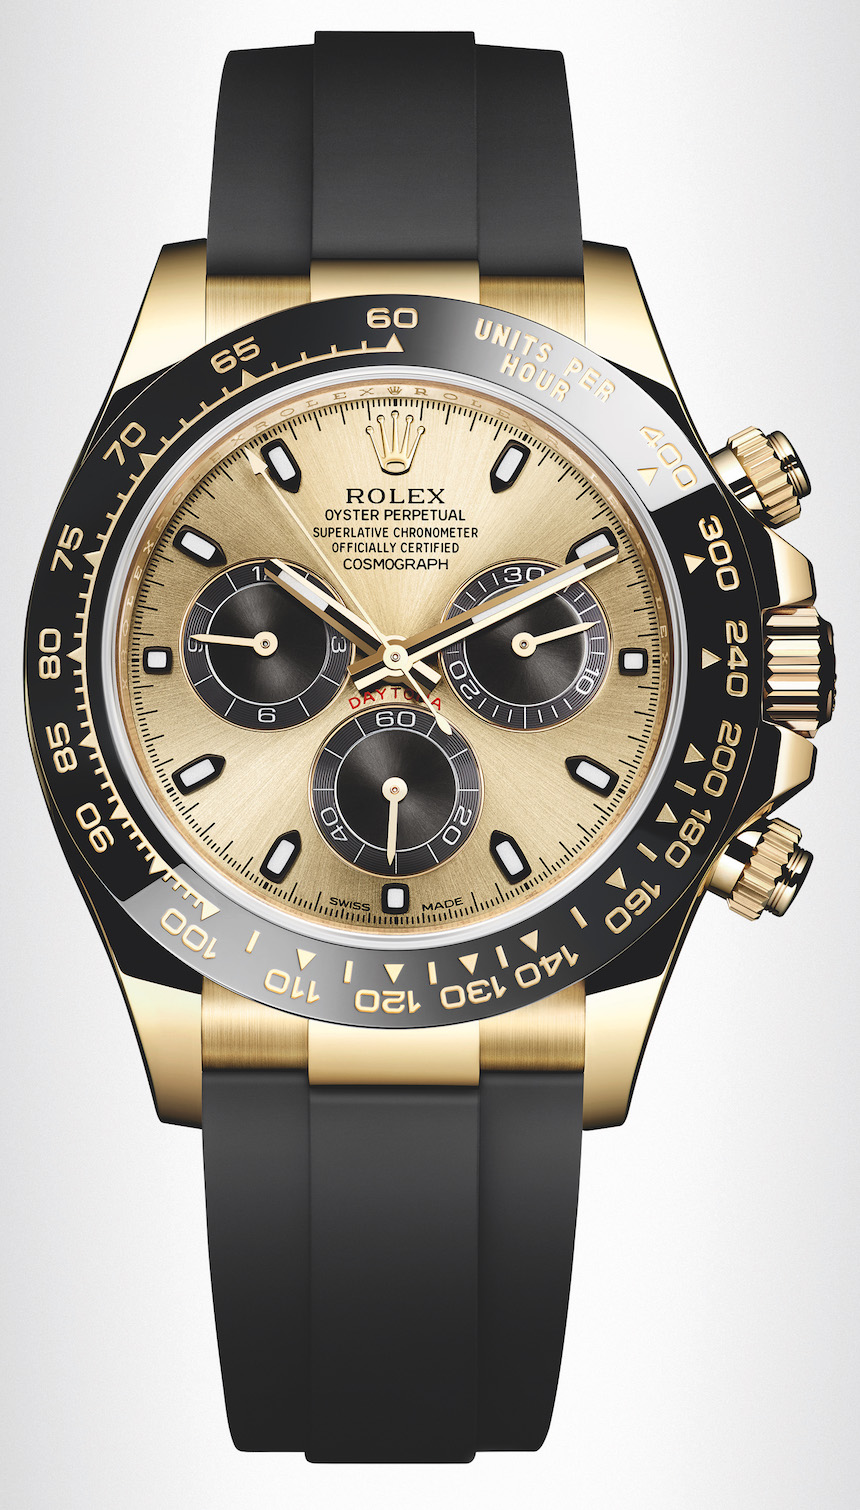 New Rolex Cosmograph Daytona Watches In Gold With Oysterflex Rubber Strap & Ceramic Bezel For 2017 Watch Releases 